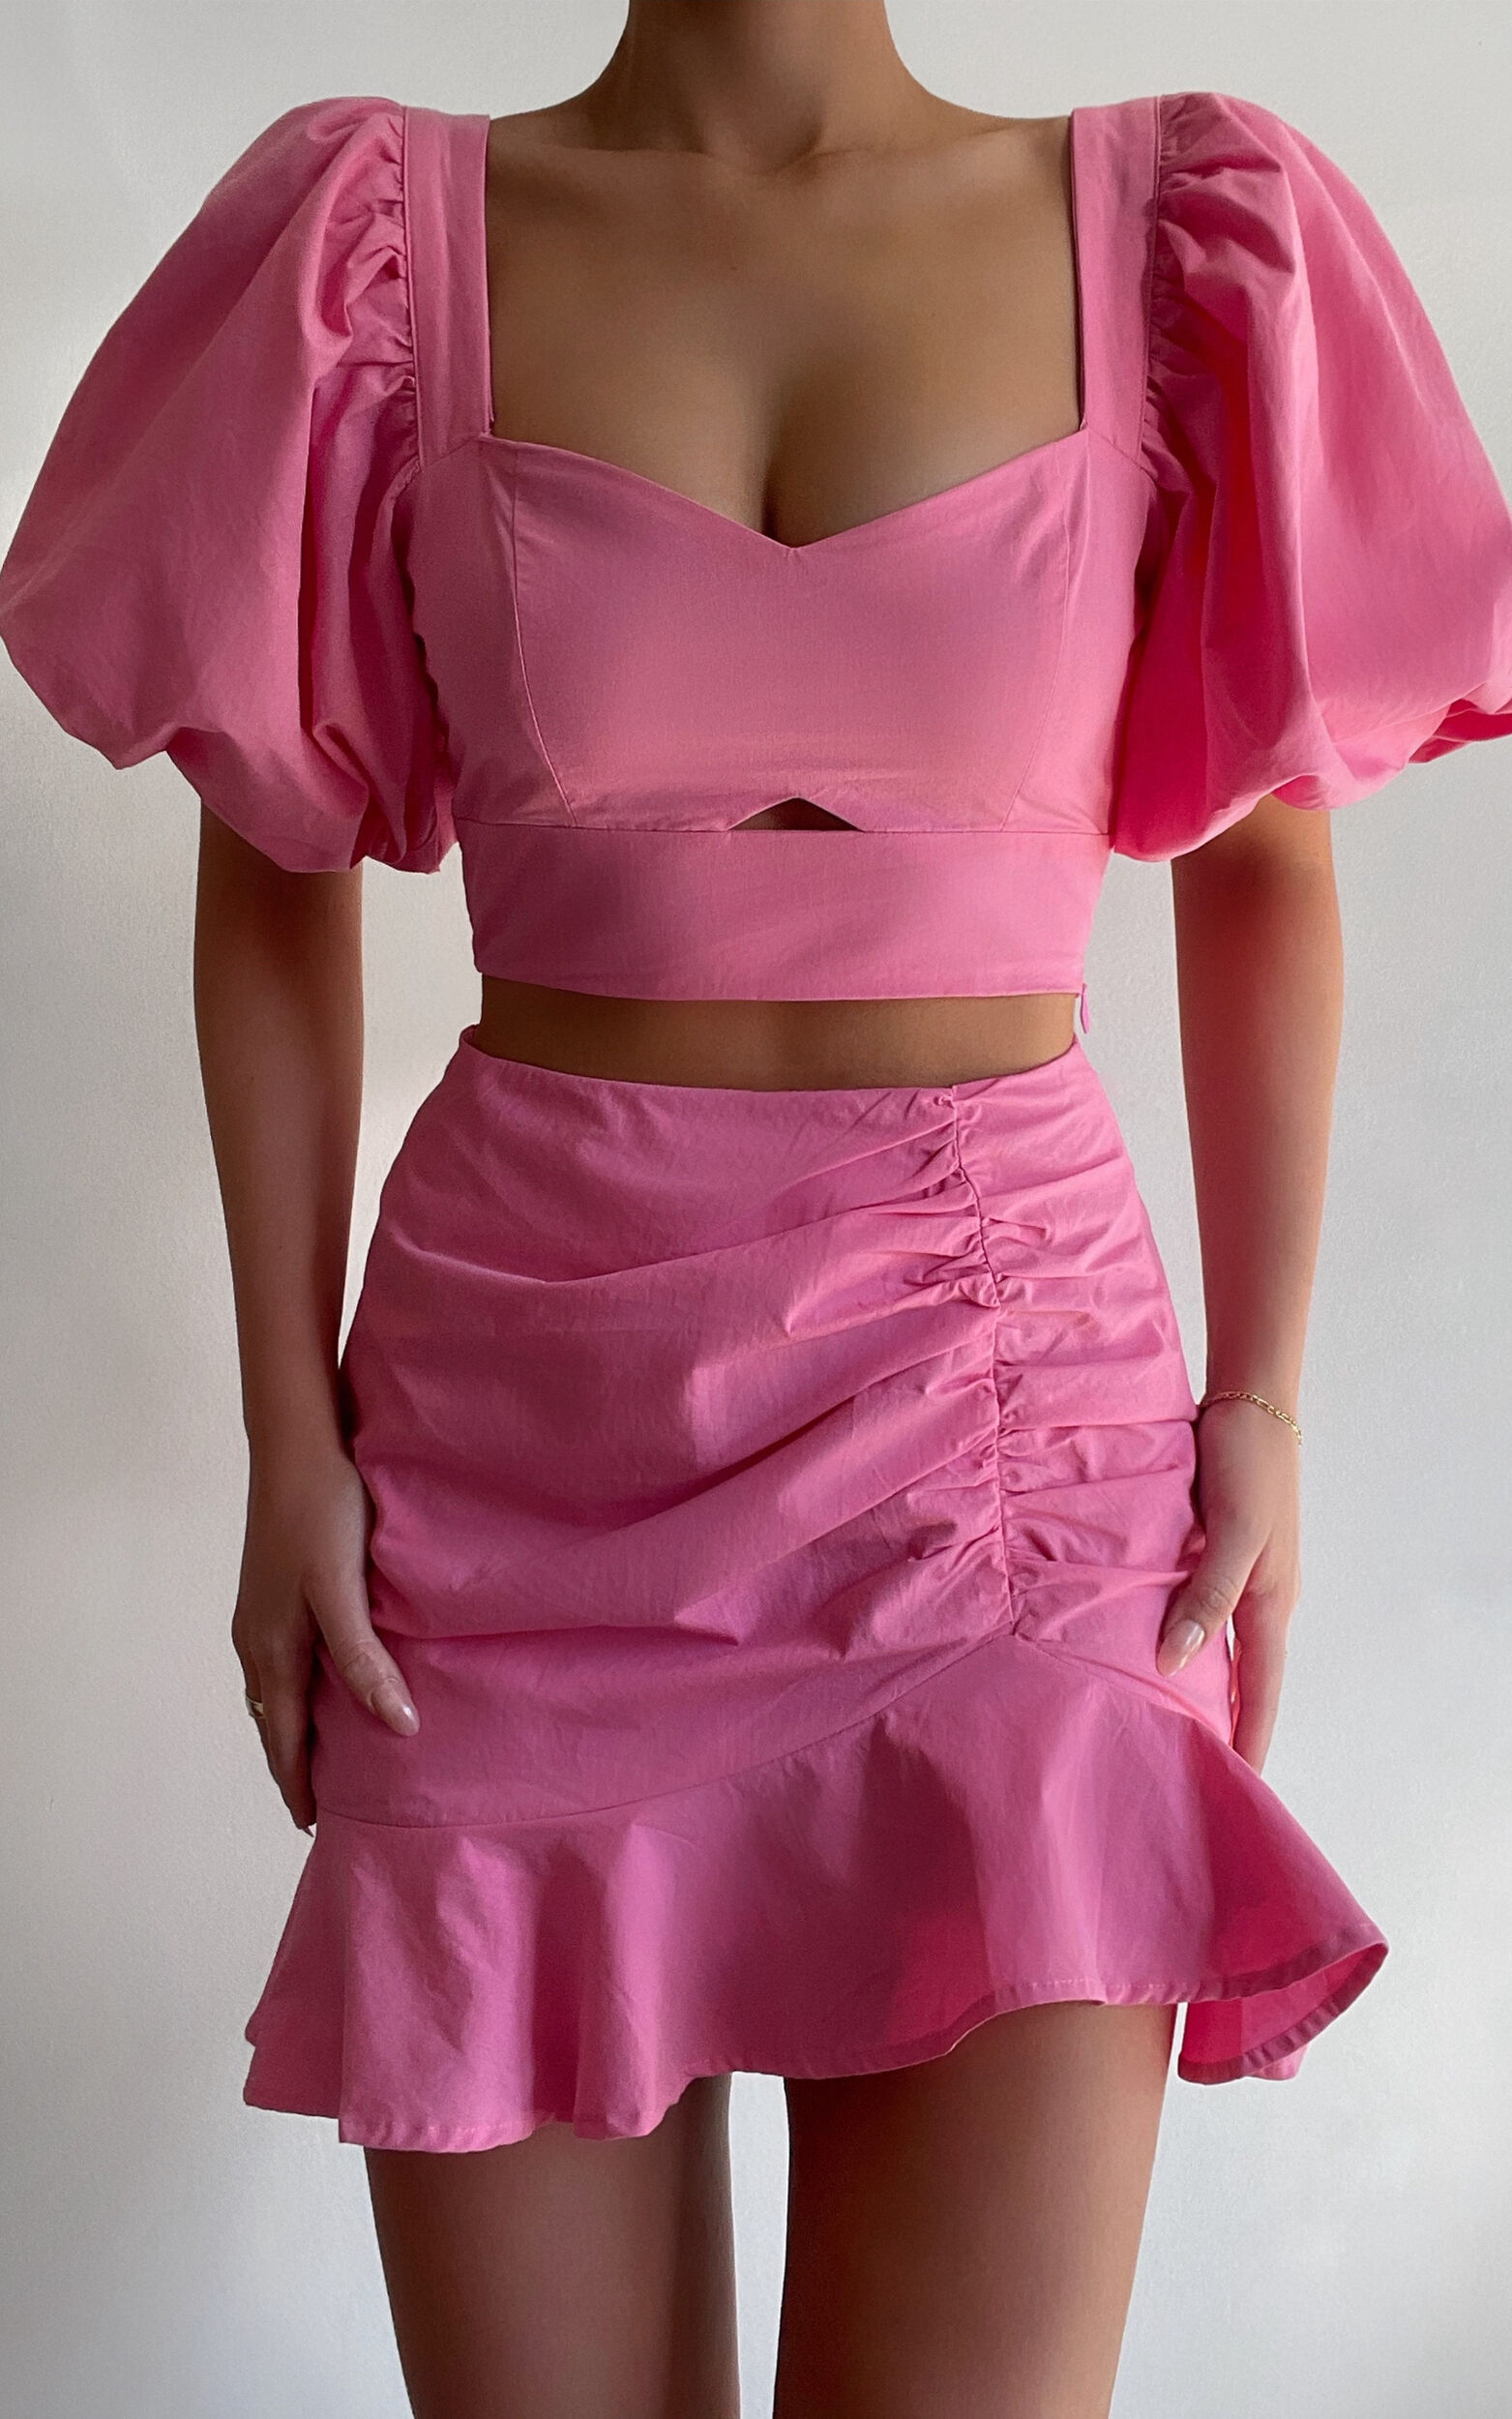 Astarte Two Piece Set - Puff Sleeve Crop Top and Ruched Mini Skirt Set in Bubblegum Pink - 06, PNK2